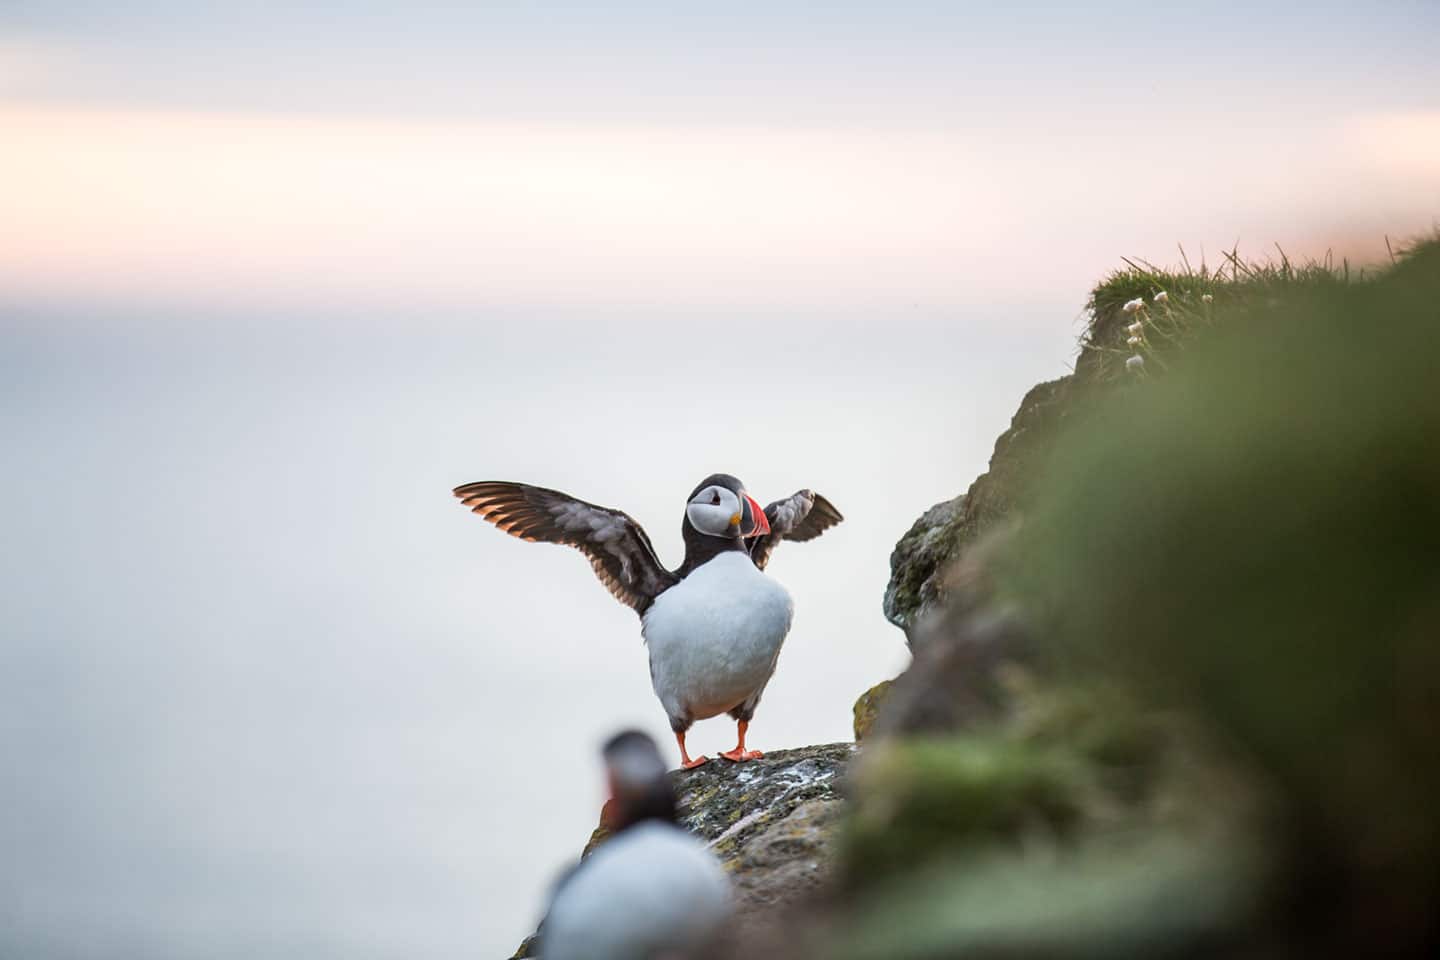 Puffins at the Latrabjarg cliffs in Iceland